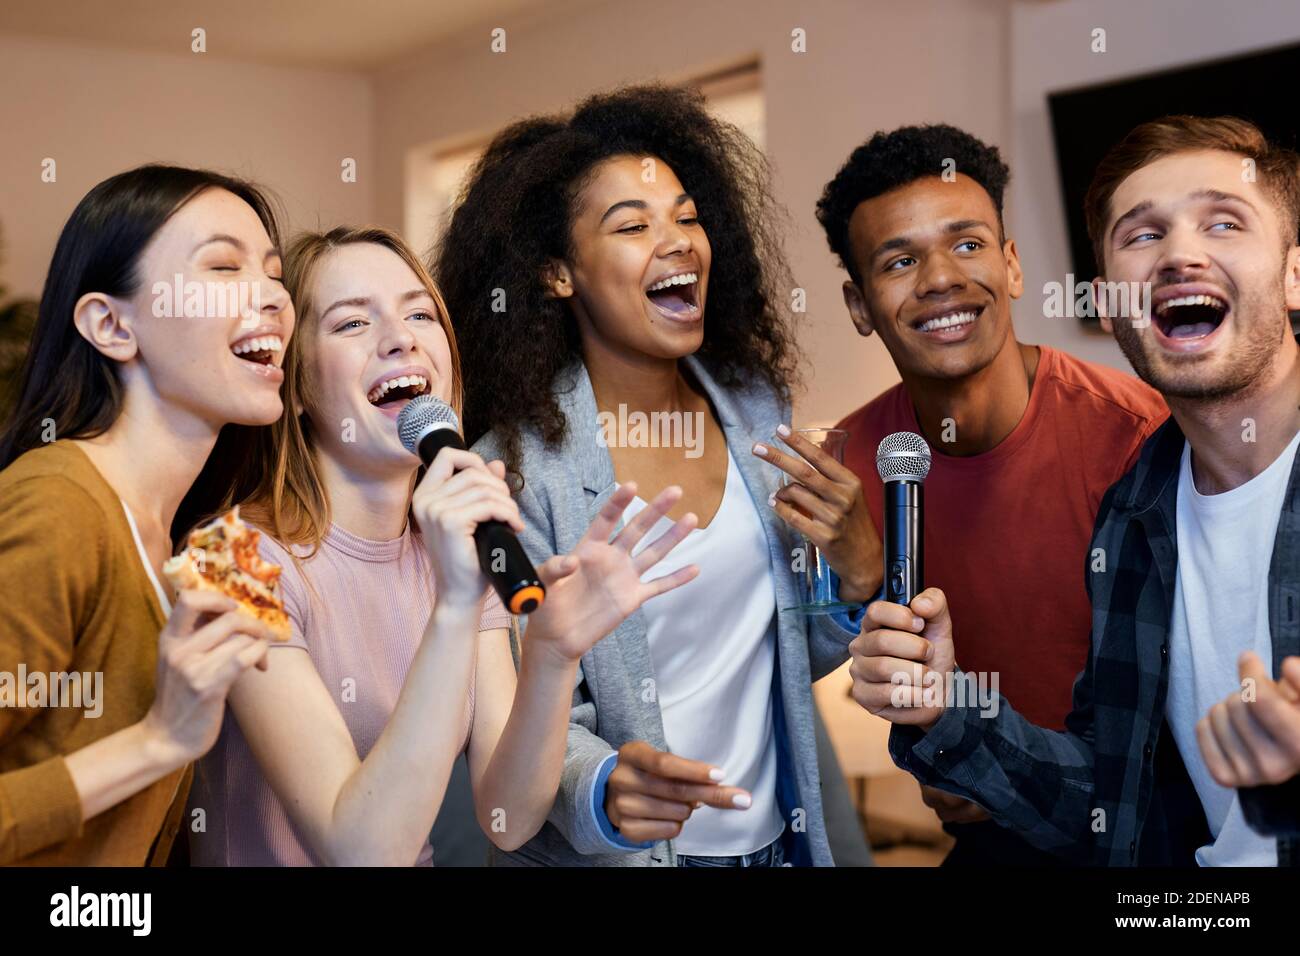 A group of five friends are singing karaoke together, they are all holding microphones and singing with joy.